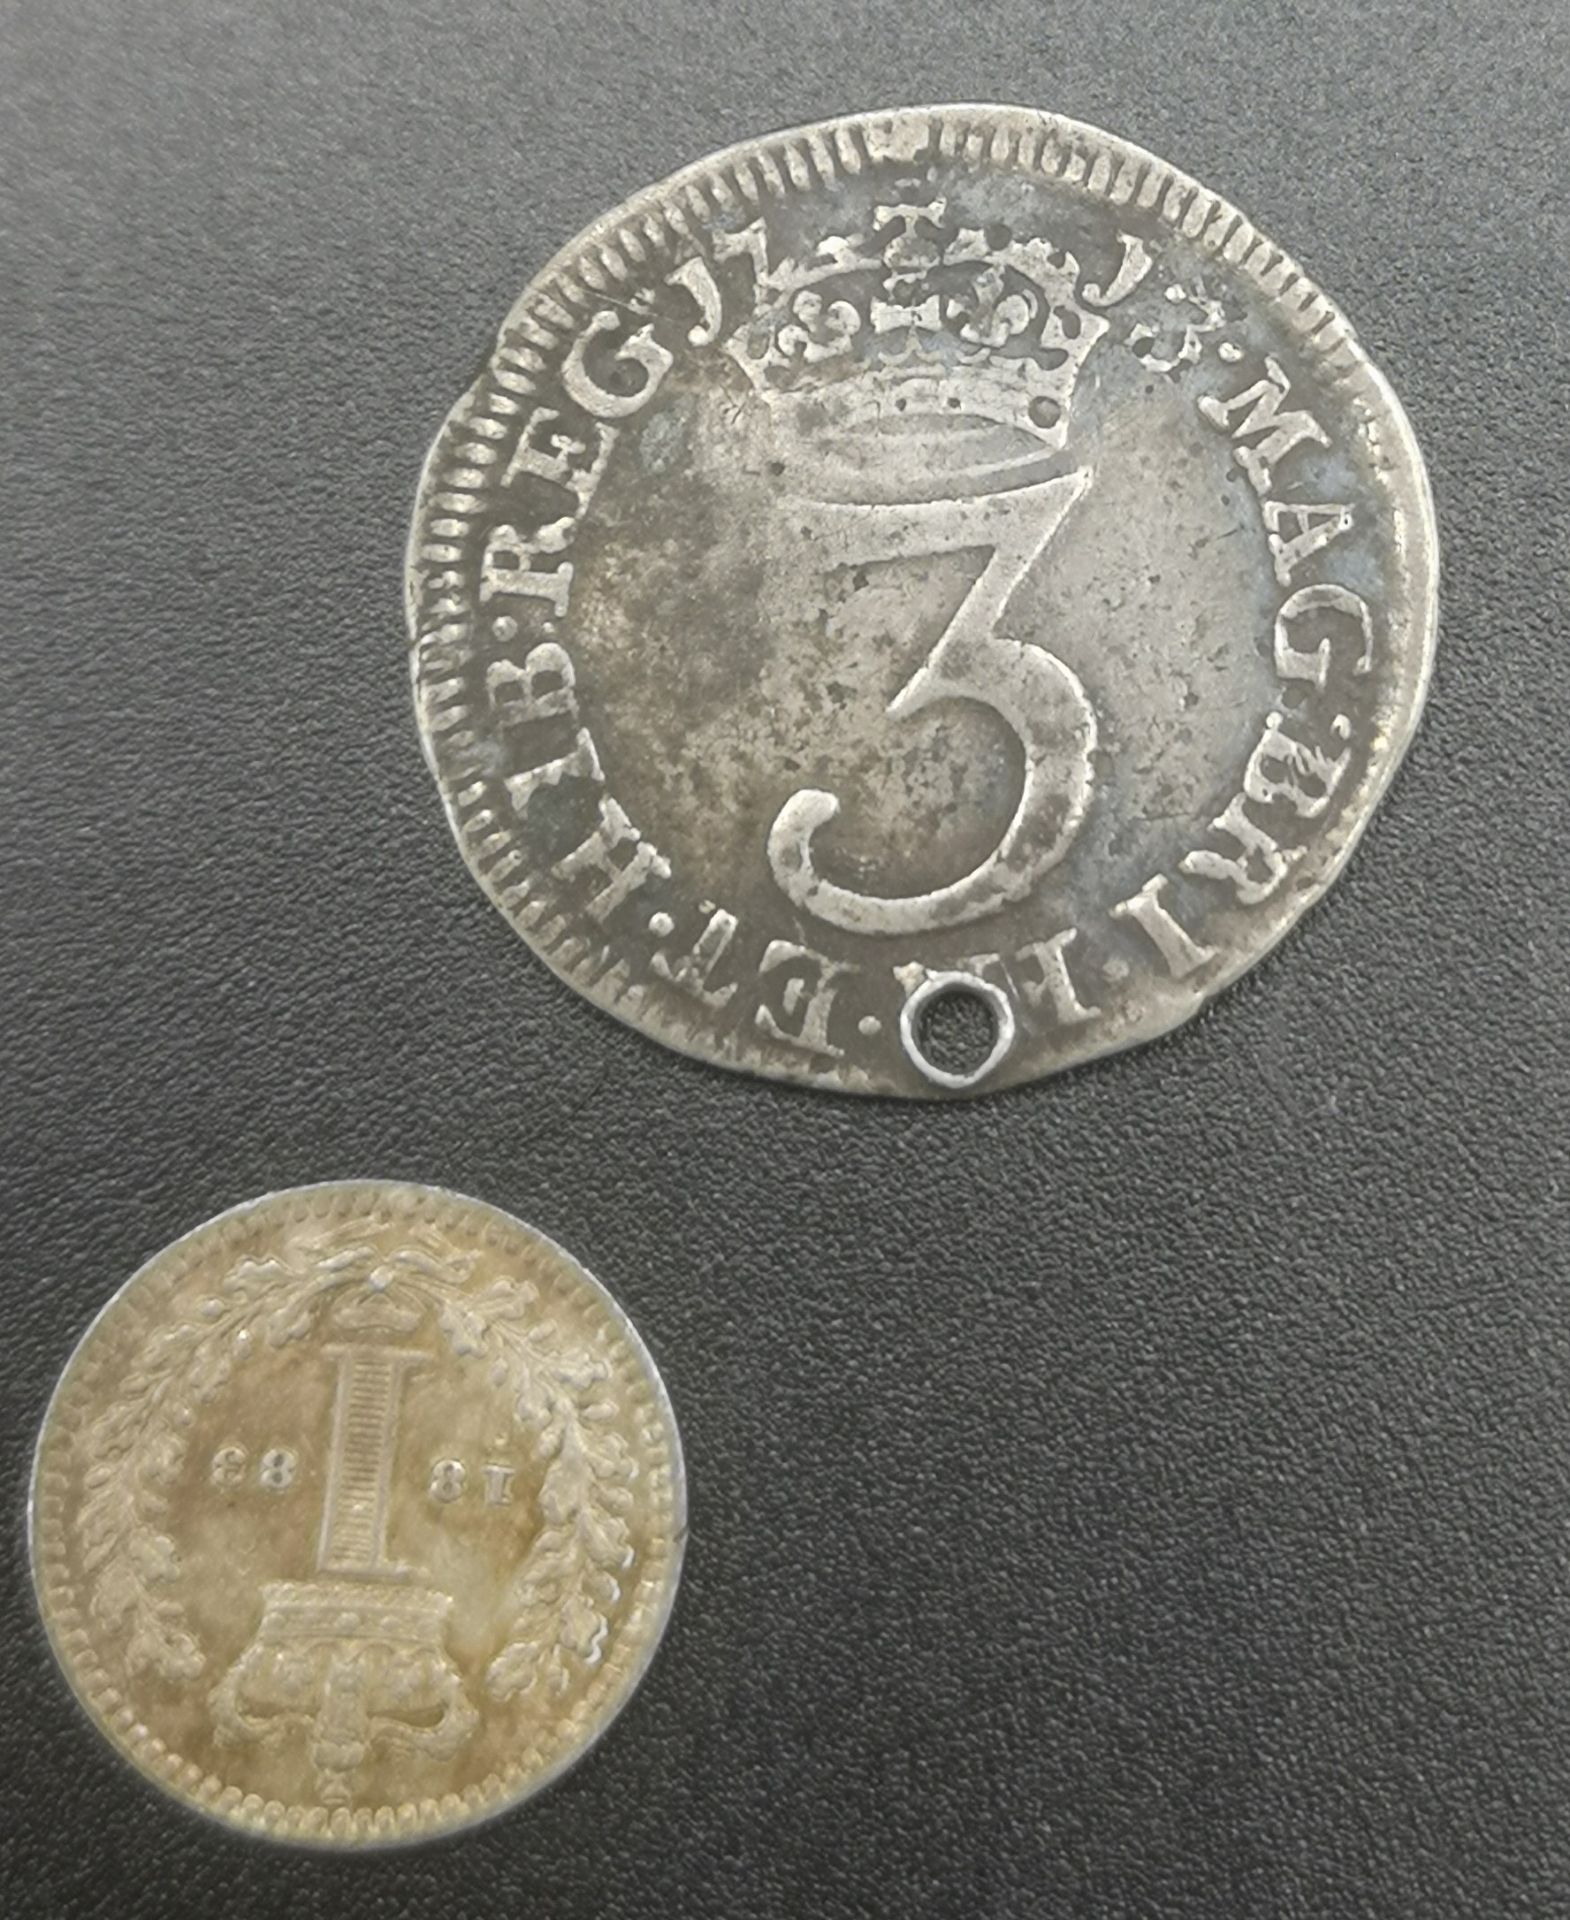 17th, 18th and 19th century Maundy coins - Image 4 of 6